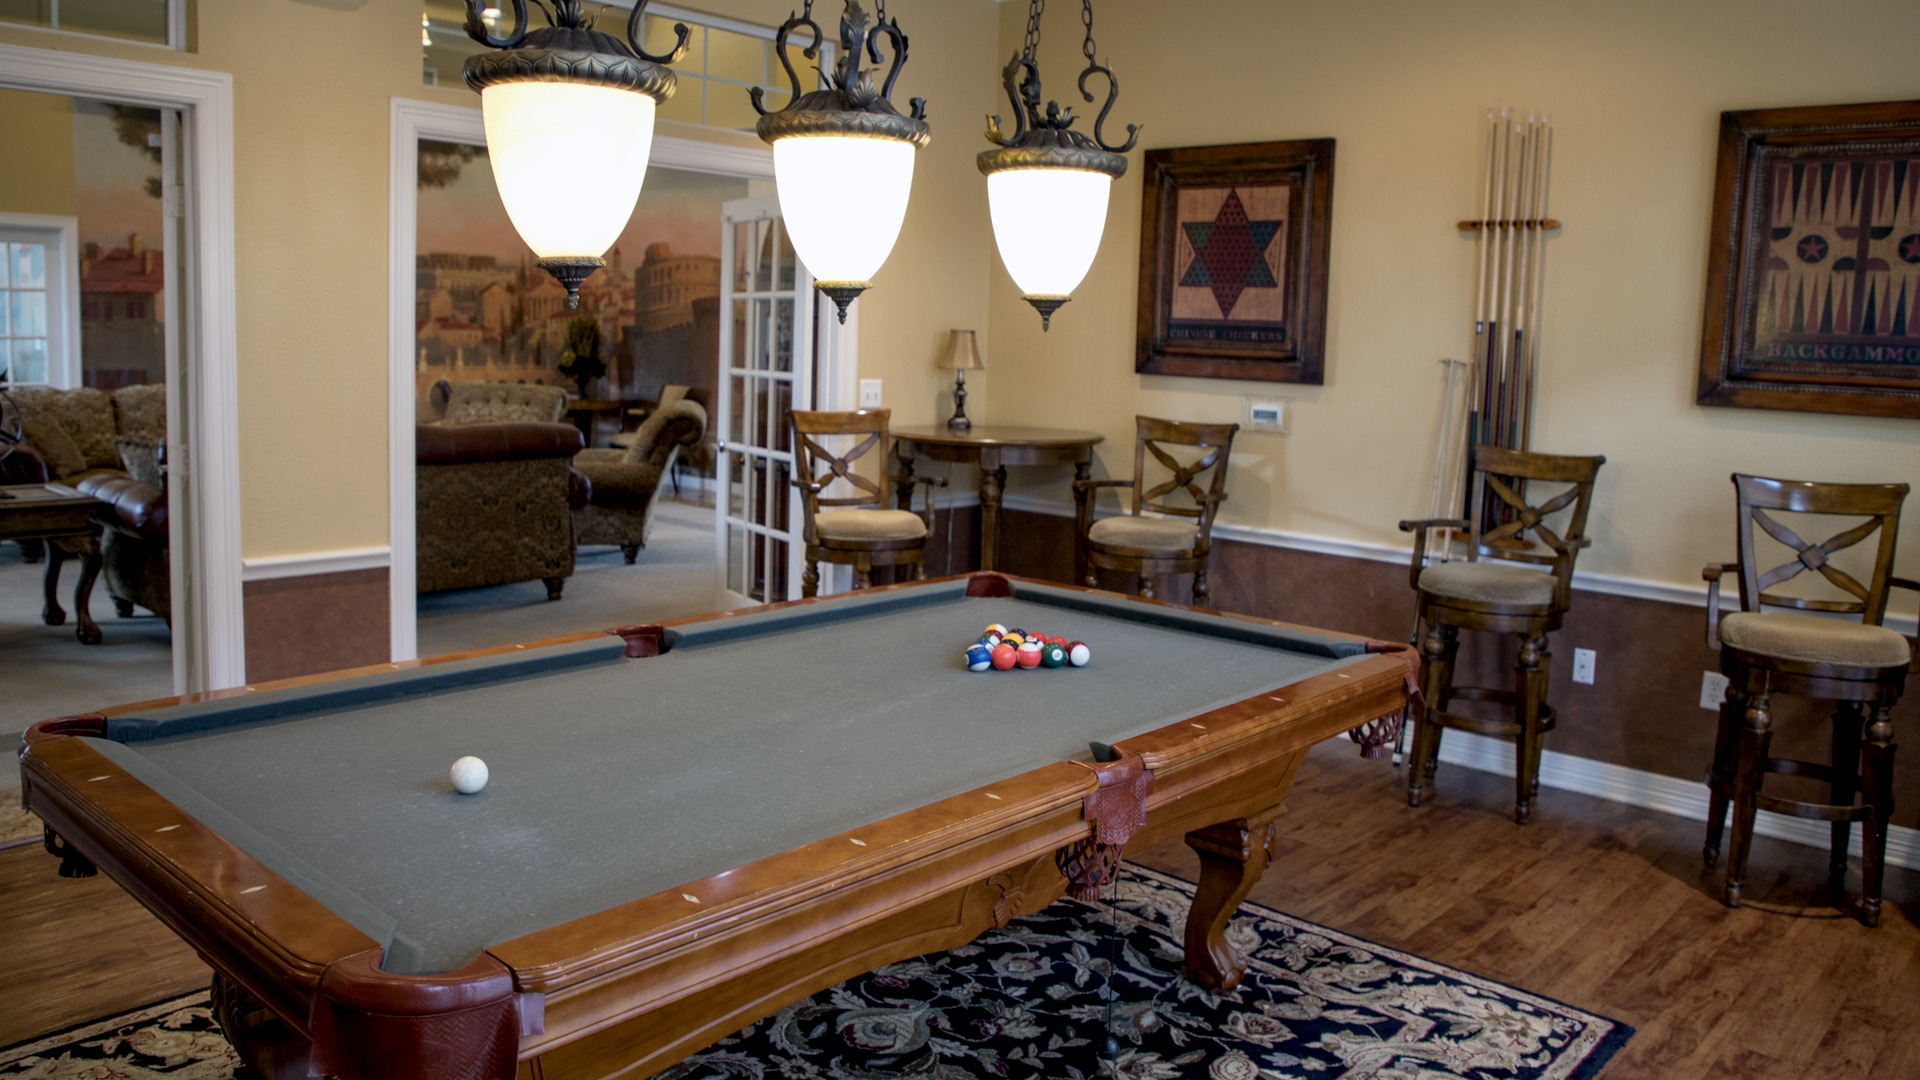 Interior shot of pool room with a game set and ready to begin